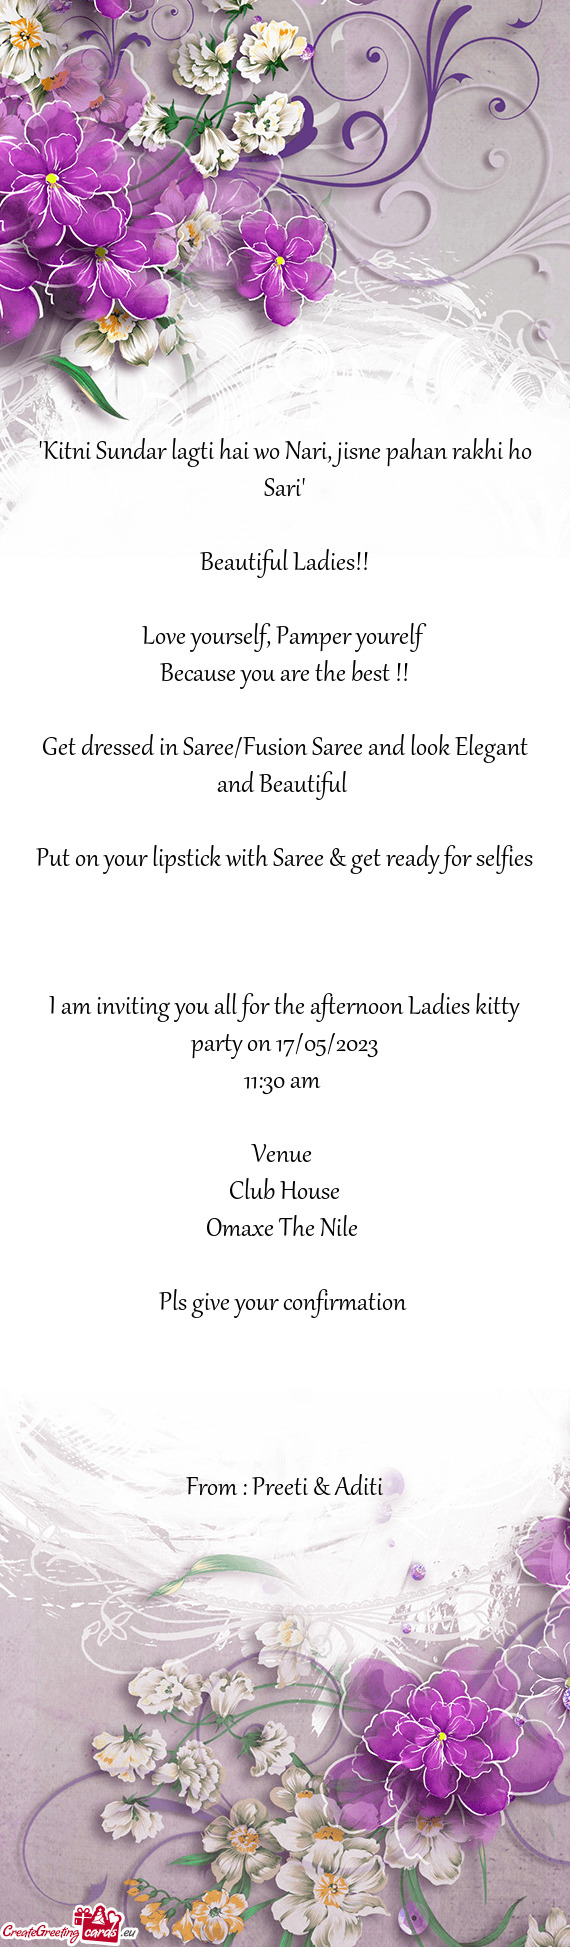 I am inviting you all for the afternoon Ladies kitty party on 17/05/2023